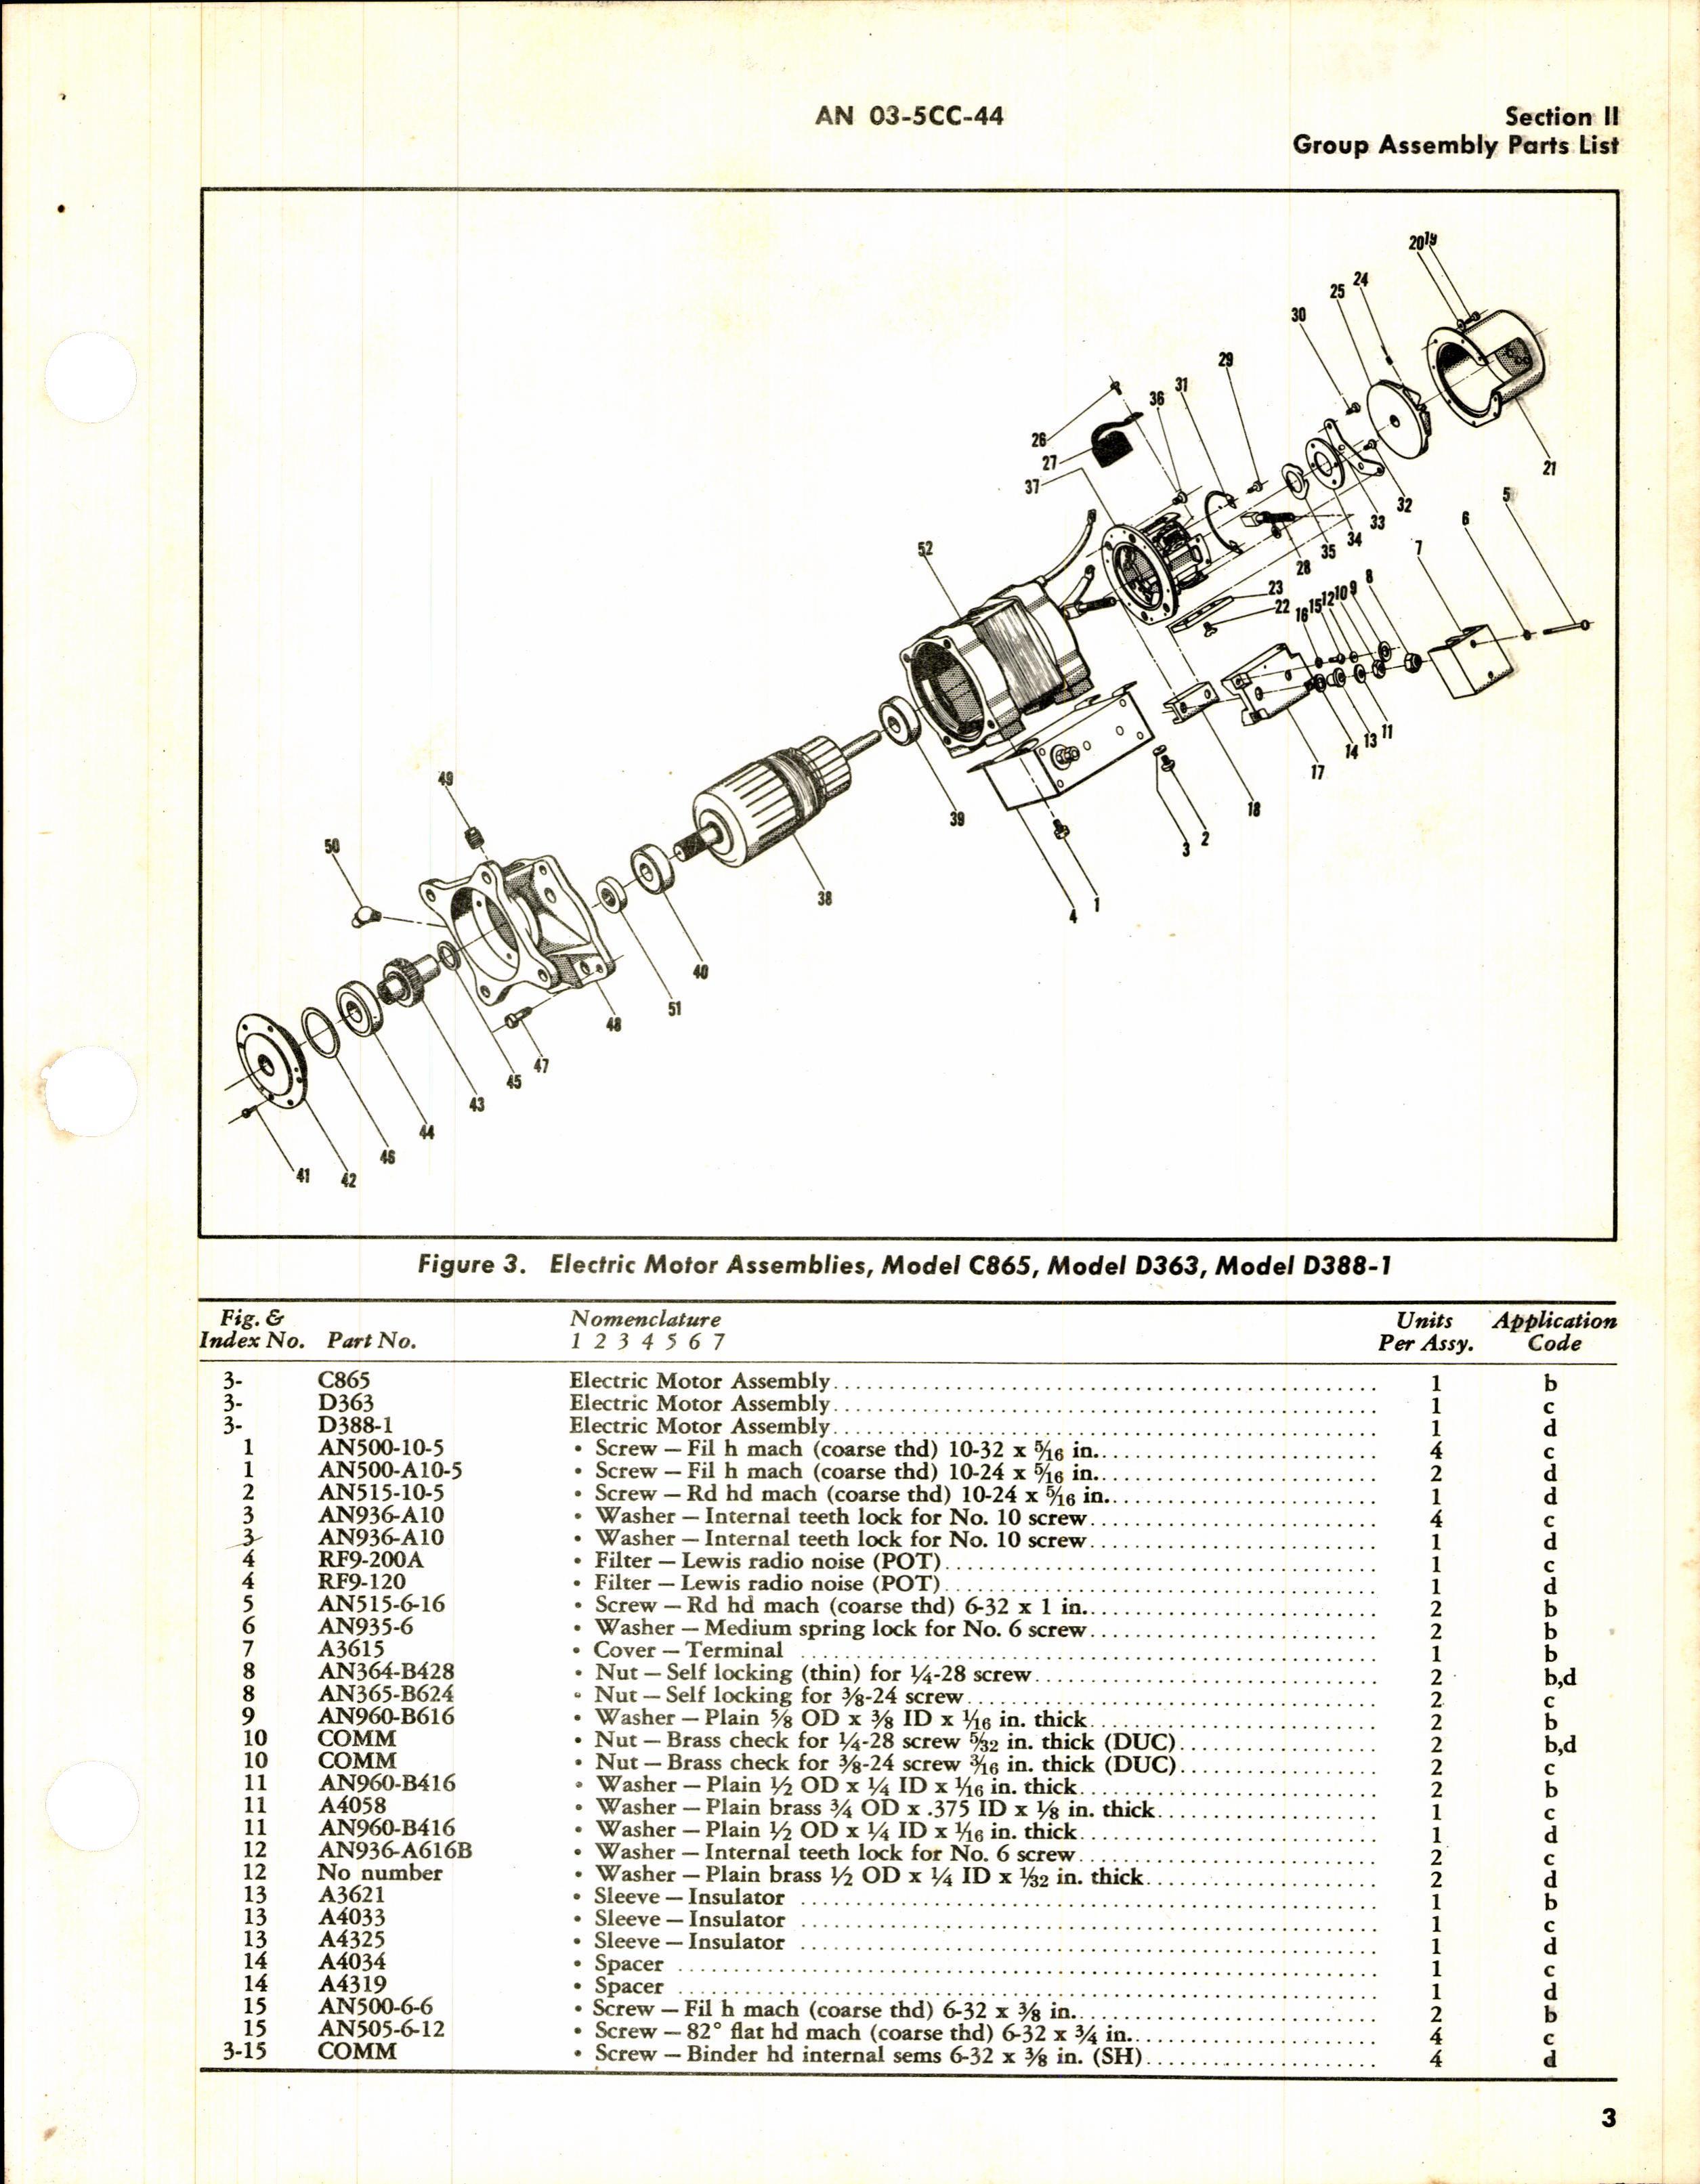 Sample page 7 from AirCorps Library document: Parts Catalog for Electrical Engineering & Mfg Electric Motors